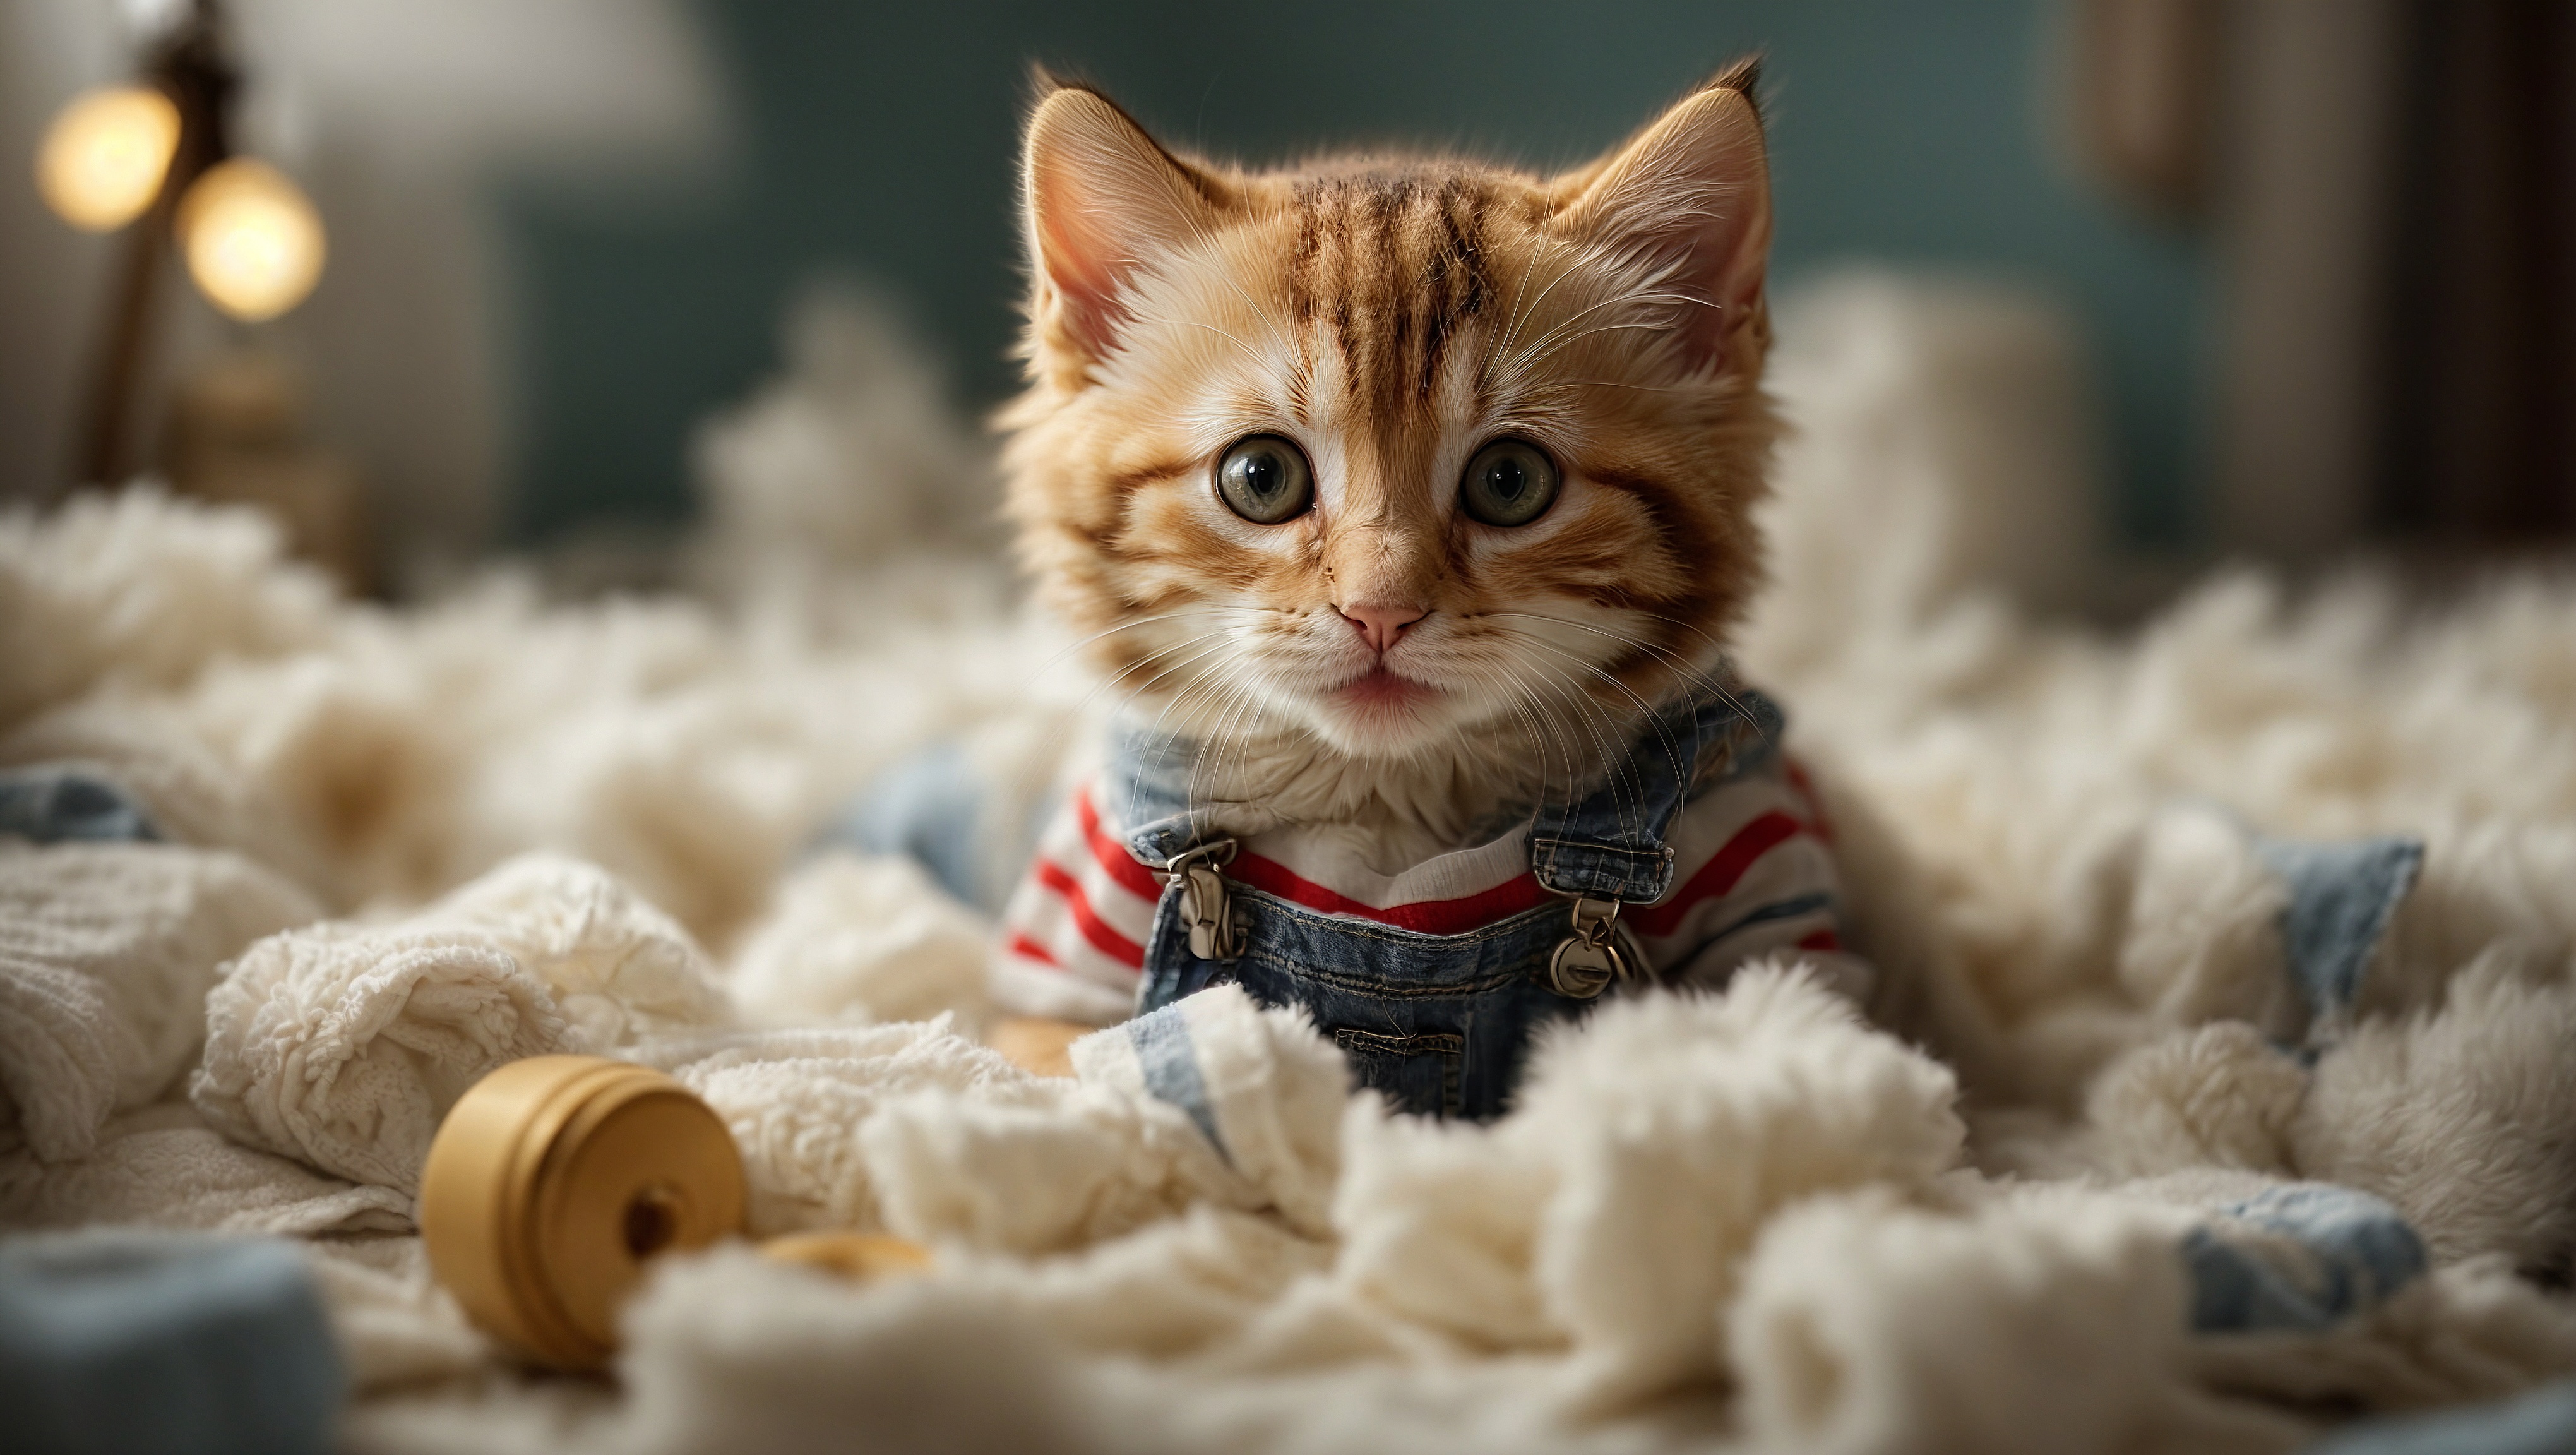 Free photo Small orange kitten dressed in overalls on top of a pile of knit